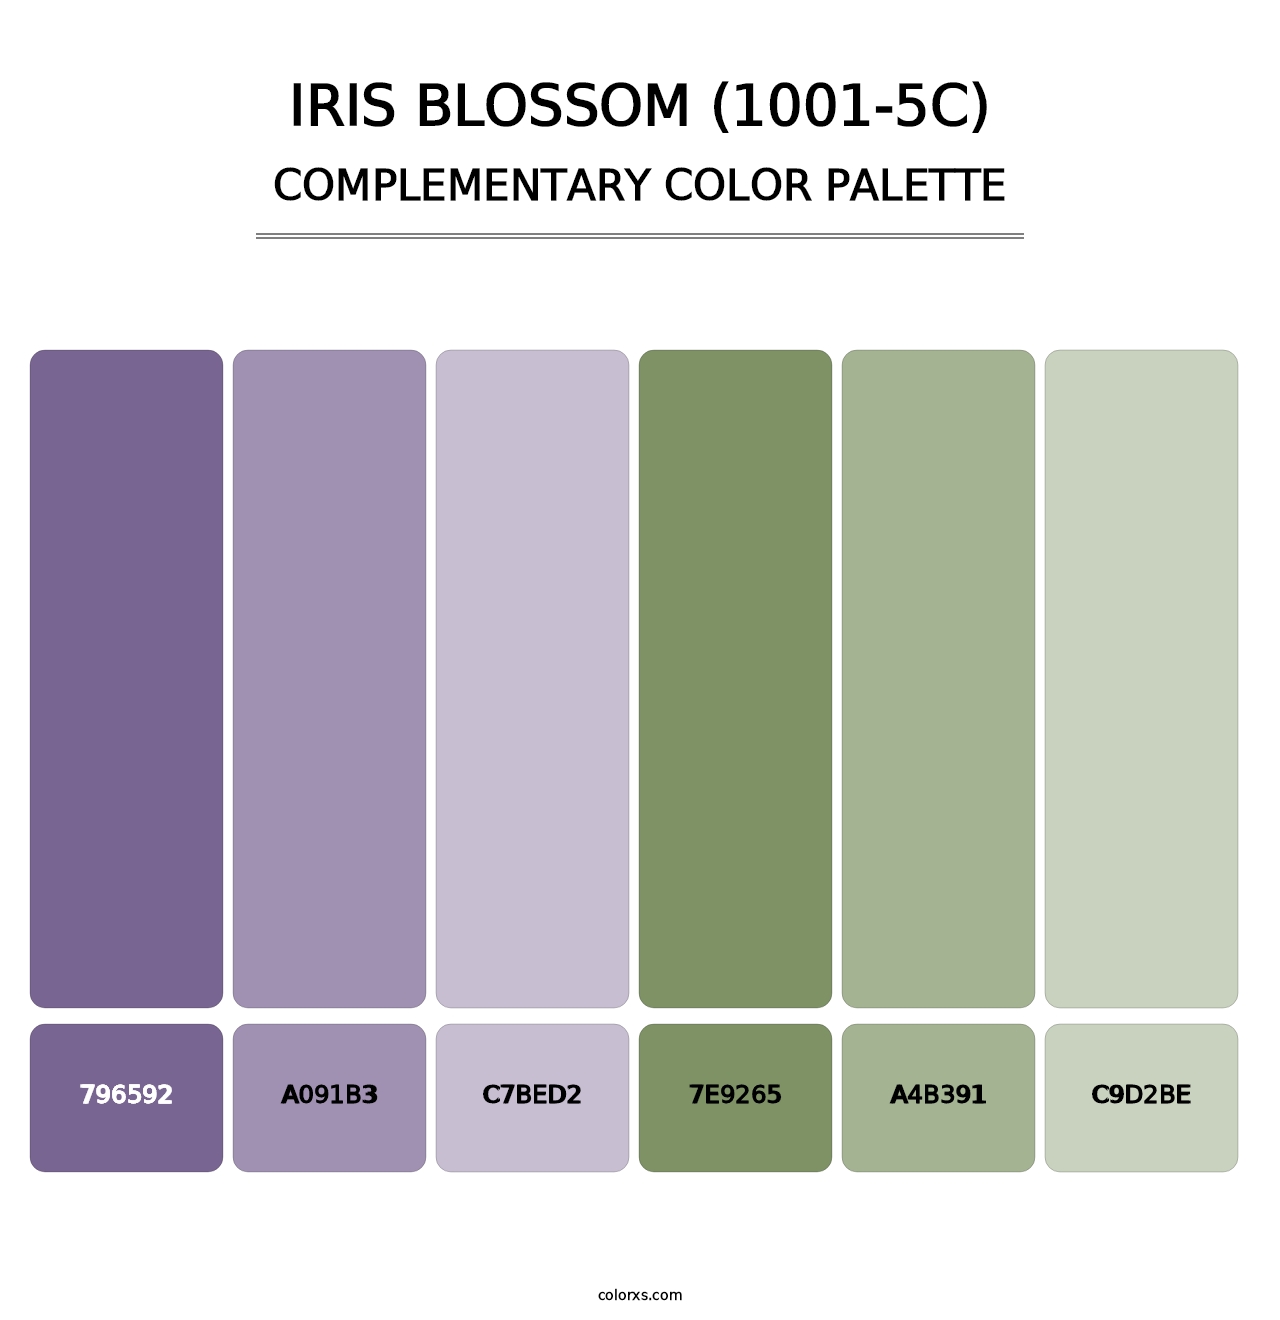 Iris Blossom (1001-5C) - Complementary Color Palette